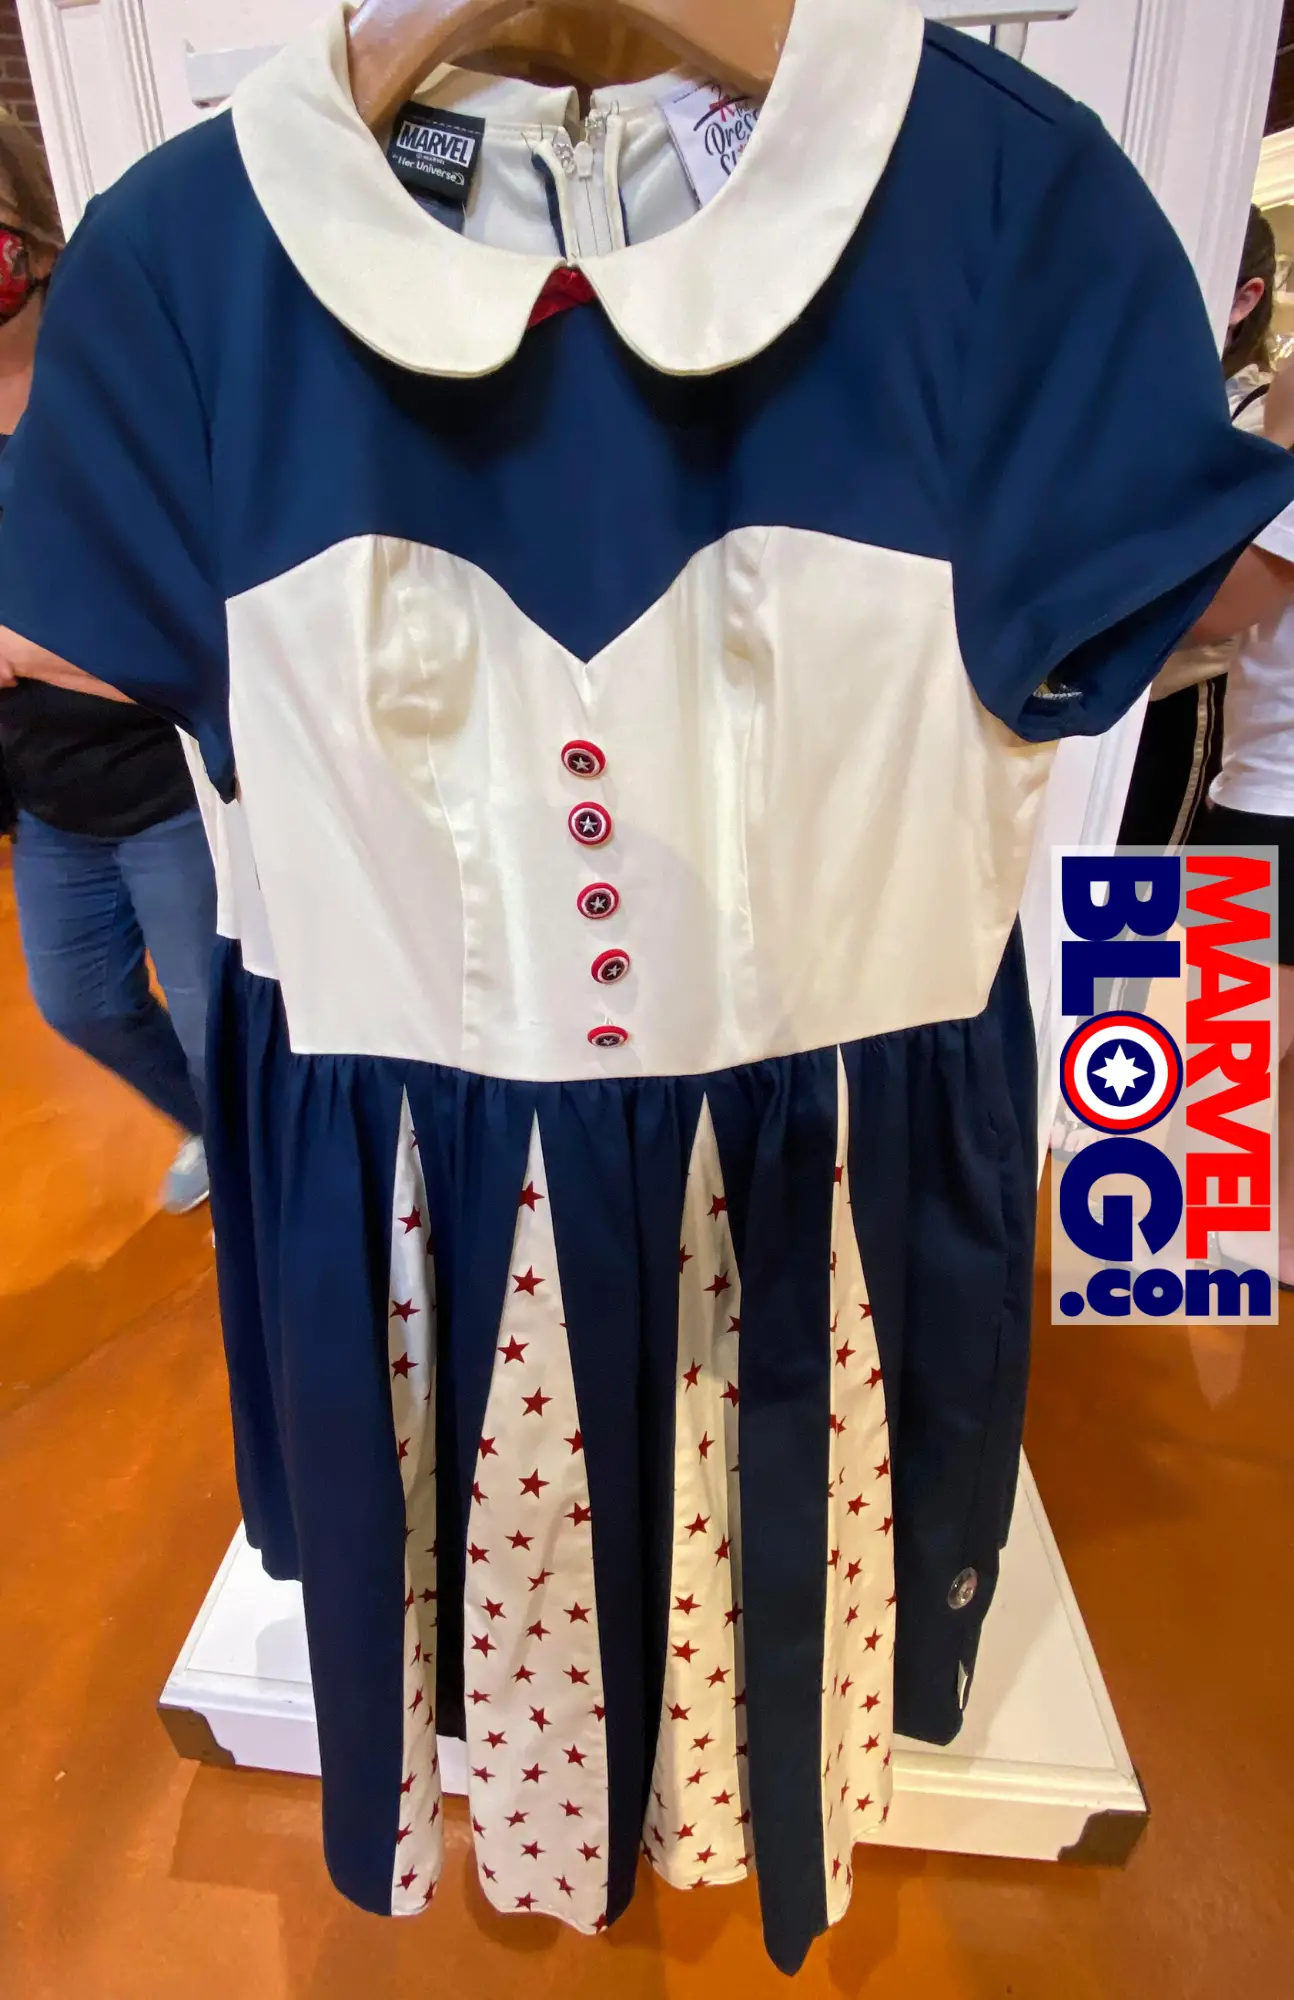 Captain America Dress at Marketplace Co-Op